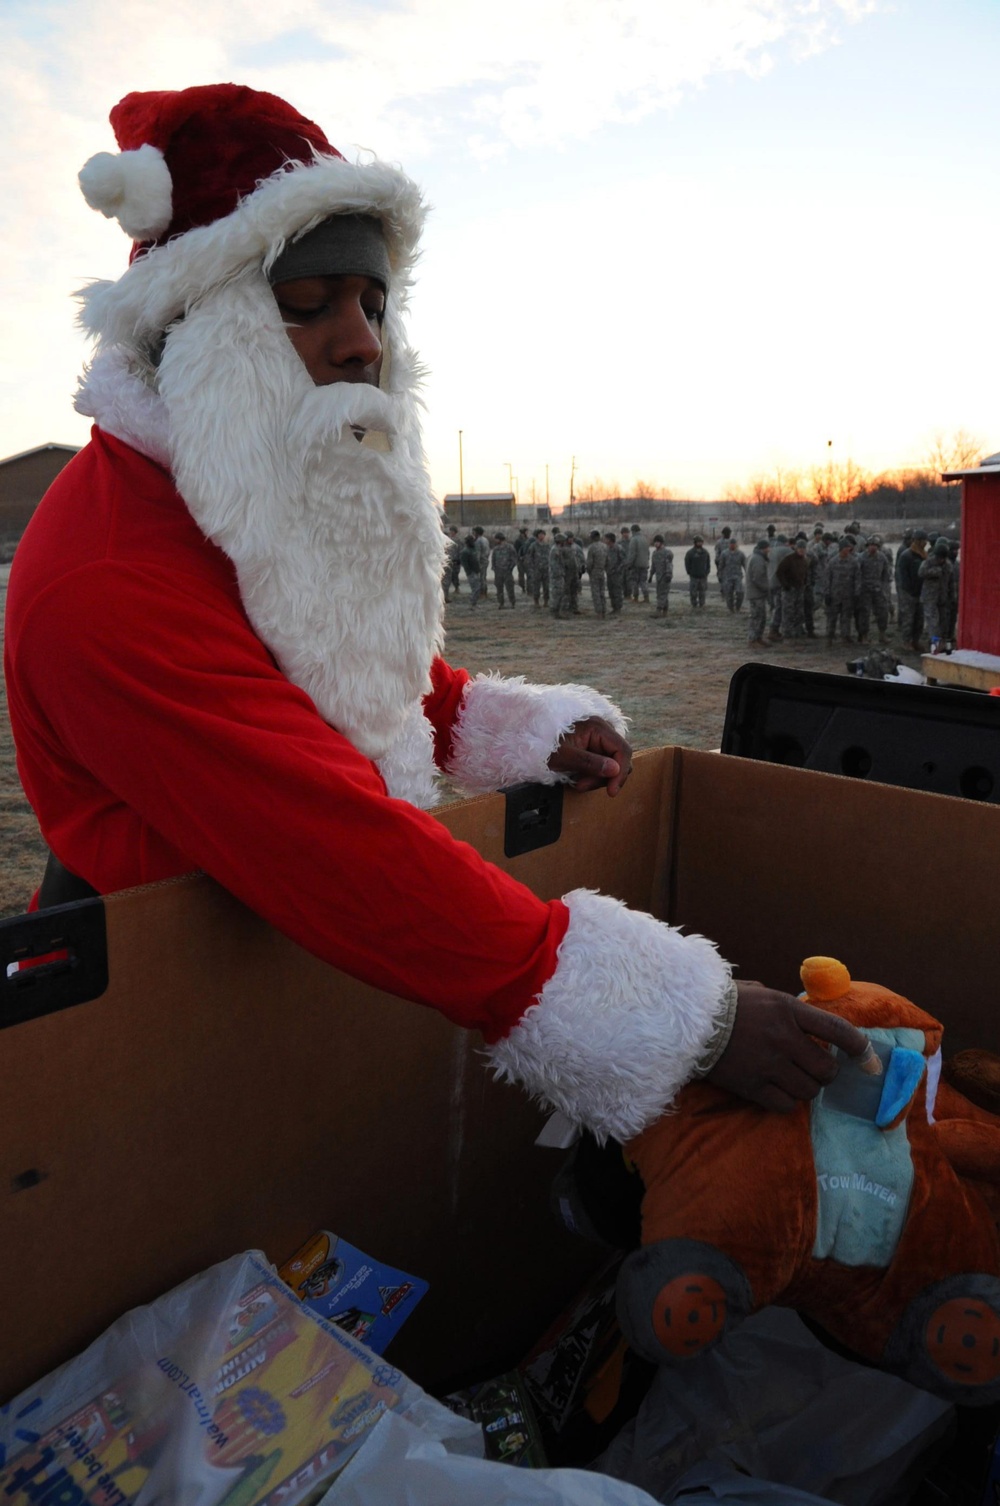 Operation Toy Drop brings presents for the holidays to kids